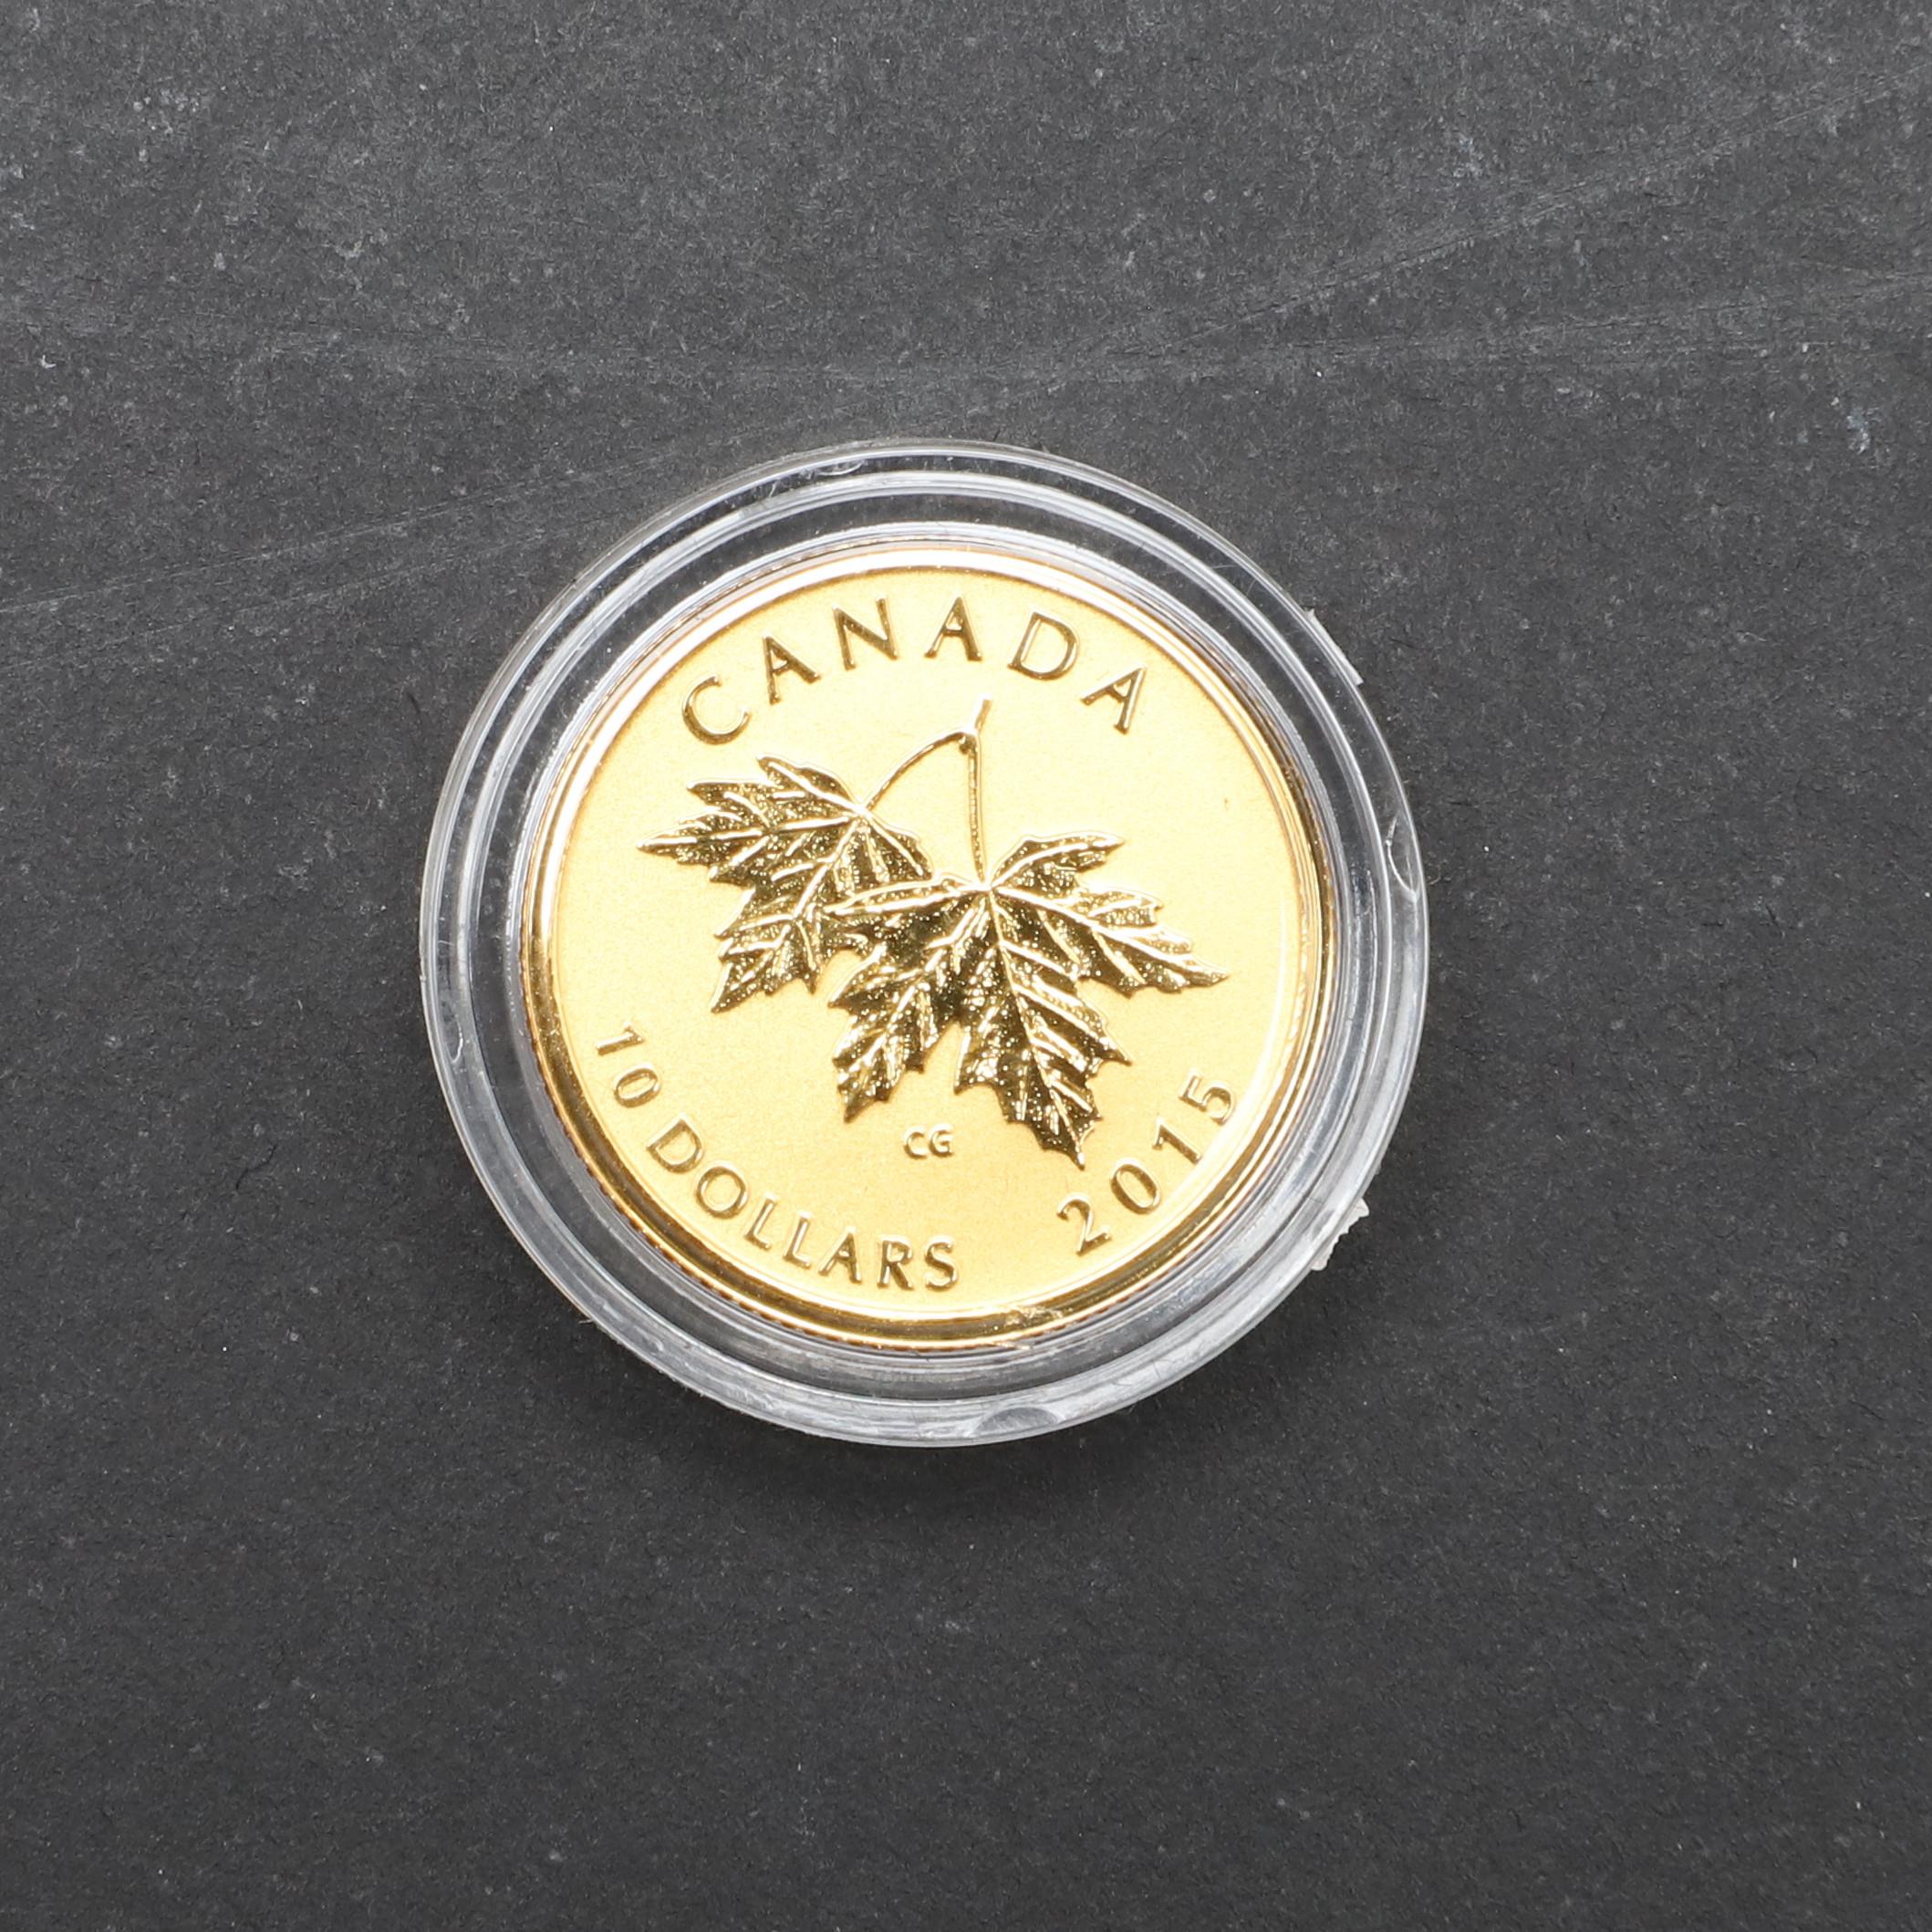 AN ELIZABETH II ROYAL CANADIAN MINT PROOF GOLD MAPLE. 2015. - Image 3 of 5